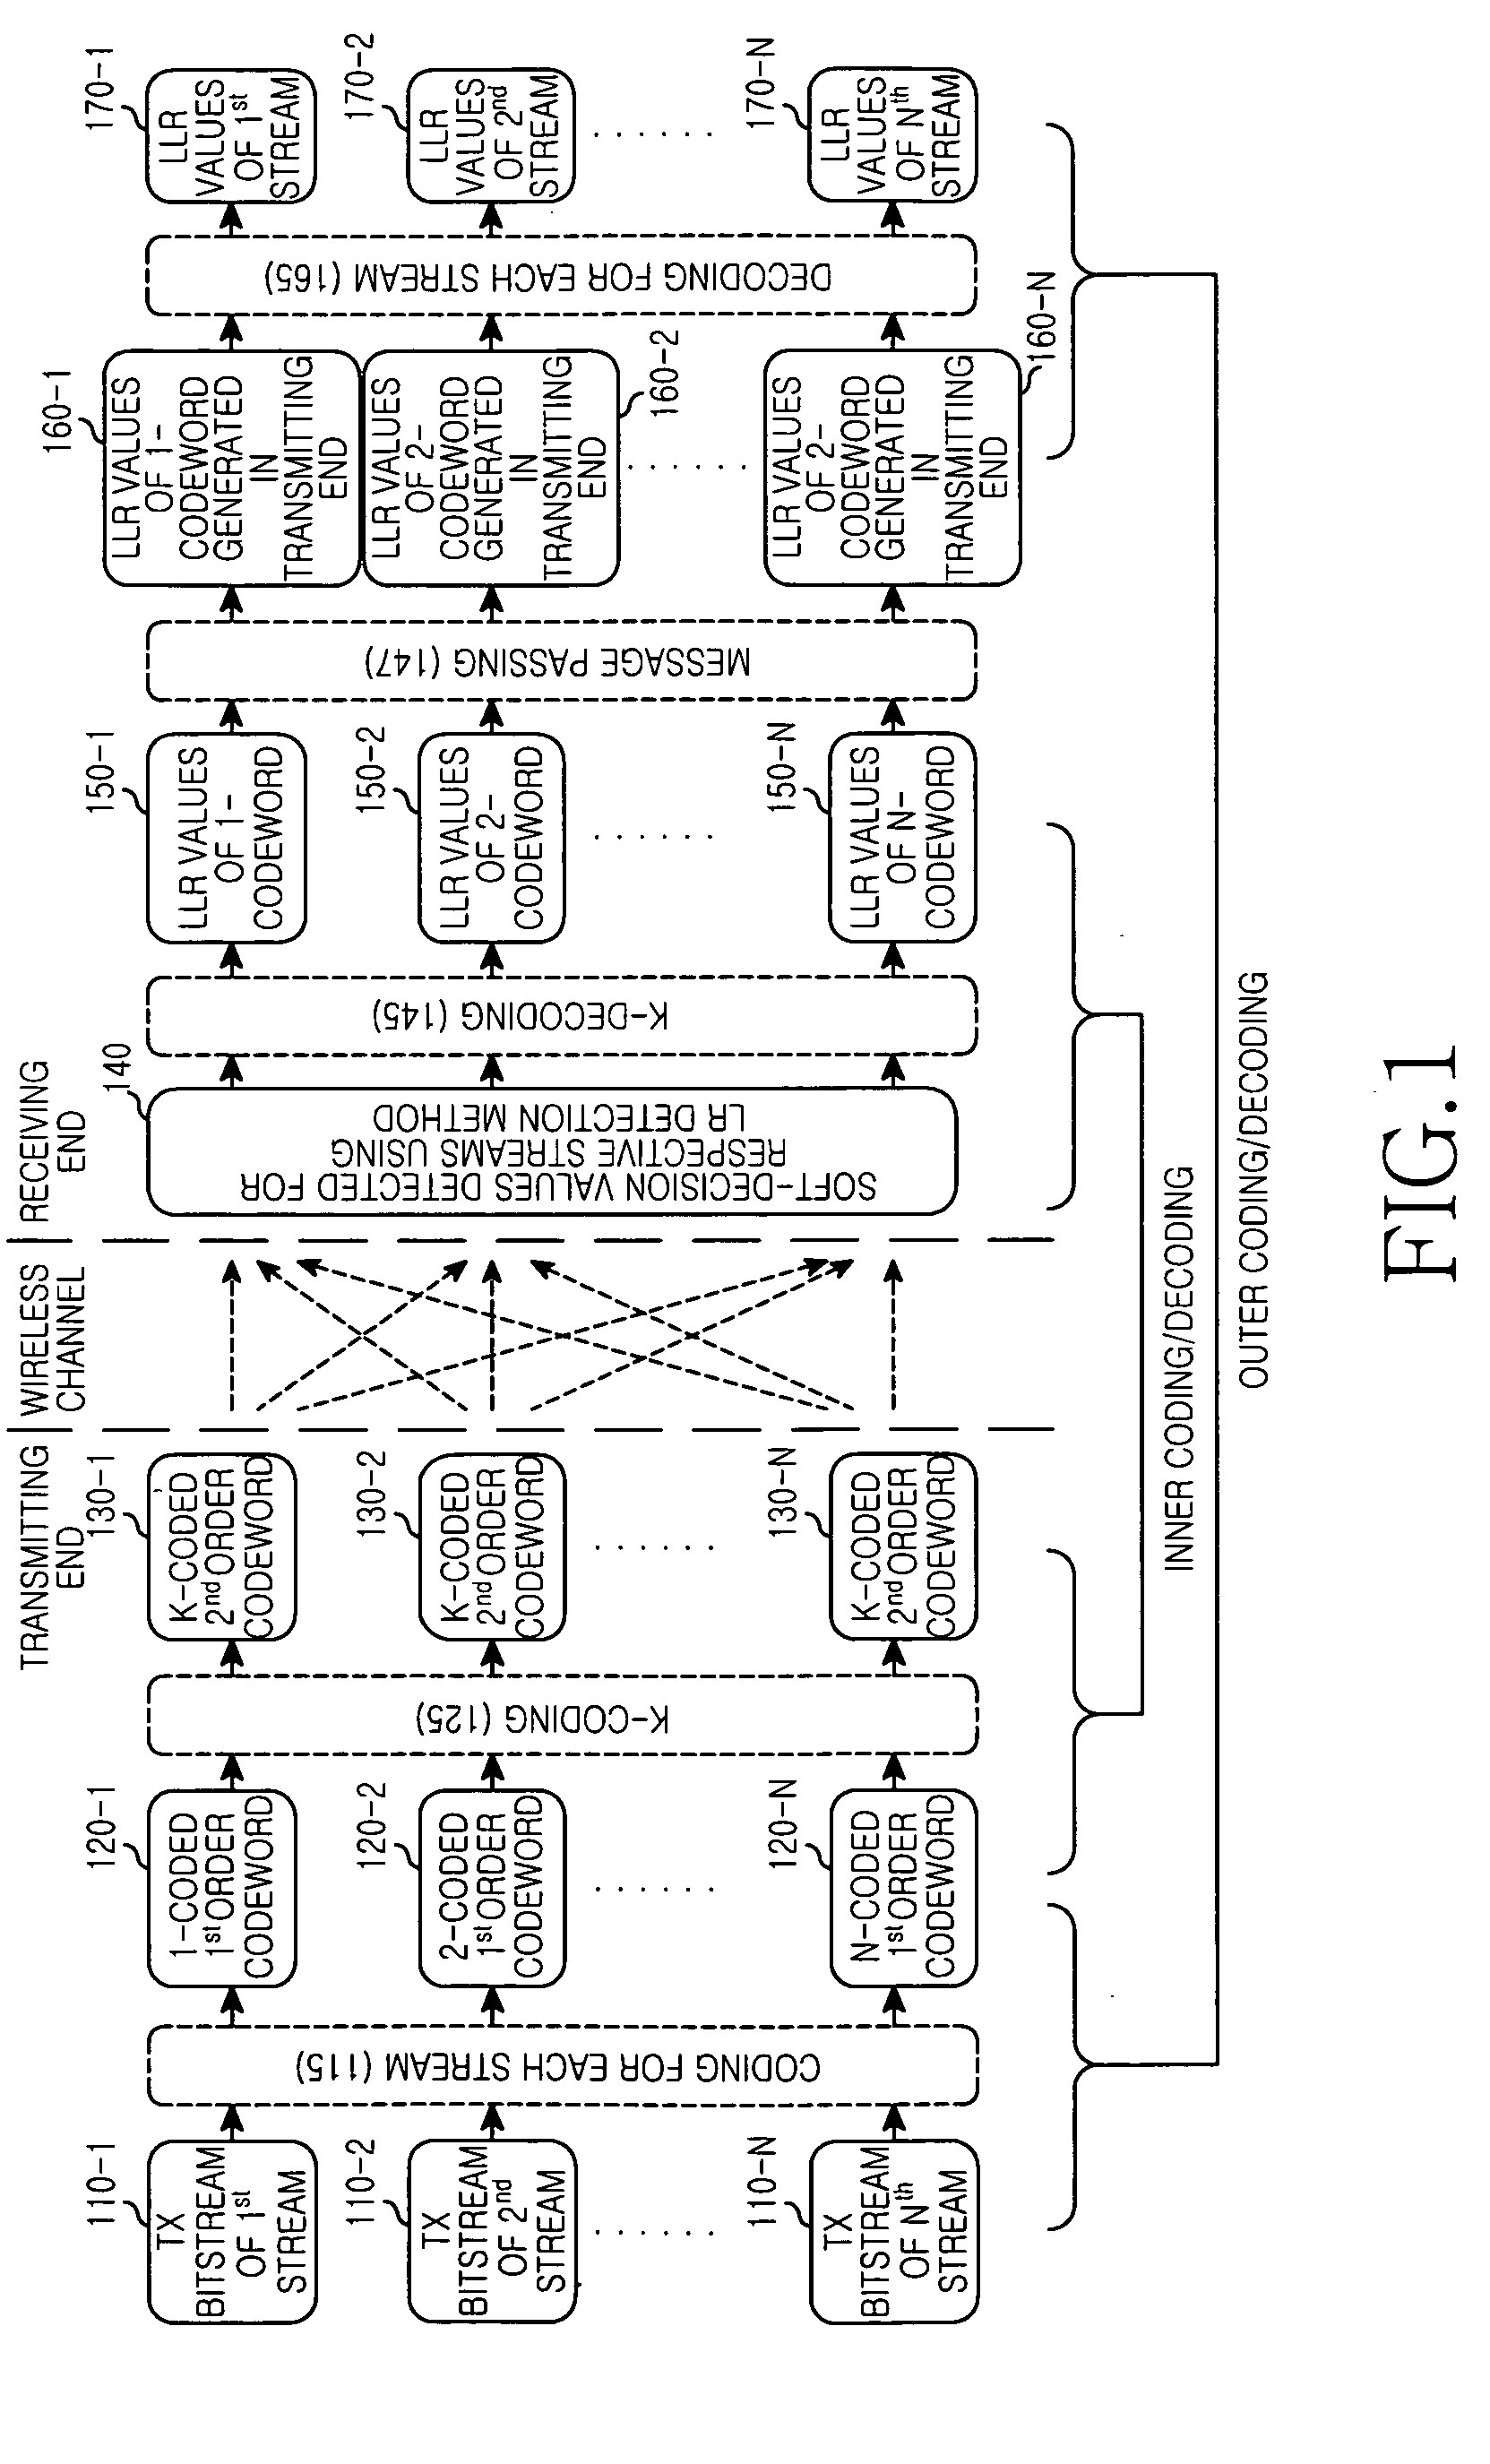 Apparatus and method for detecting signal based on lattice reduction to support different coding scheme for each stream in multiple input multiple output wireless communication system